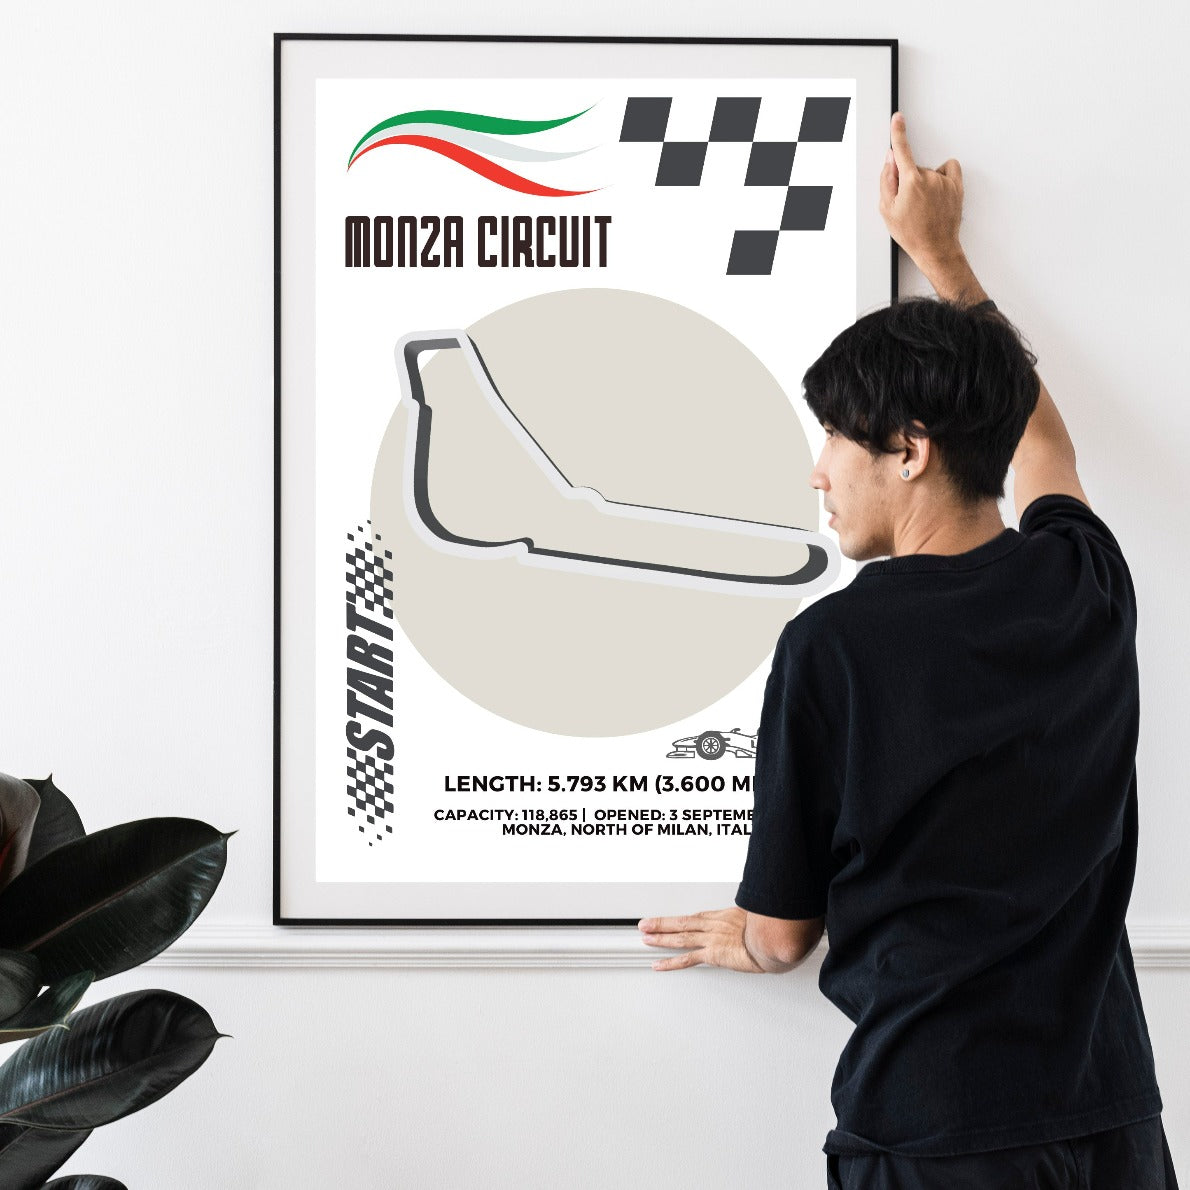 Expertly crafted in the UK, our Monza Circuit F1 Italy Posters feature detailed maps and information about the world's most iconic F1 racing tracks. Made with age-resistant matte premium paper, these prints are a must-have for any F1 enthusiast. Complete your collection with our "Formula One Poster" for the ultimate fan experience.